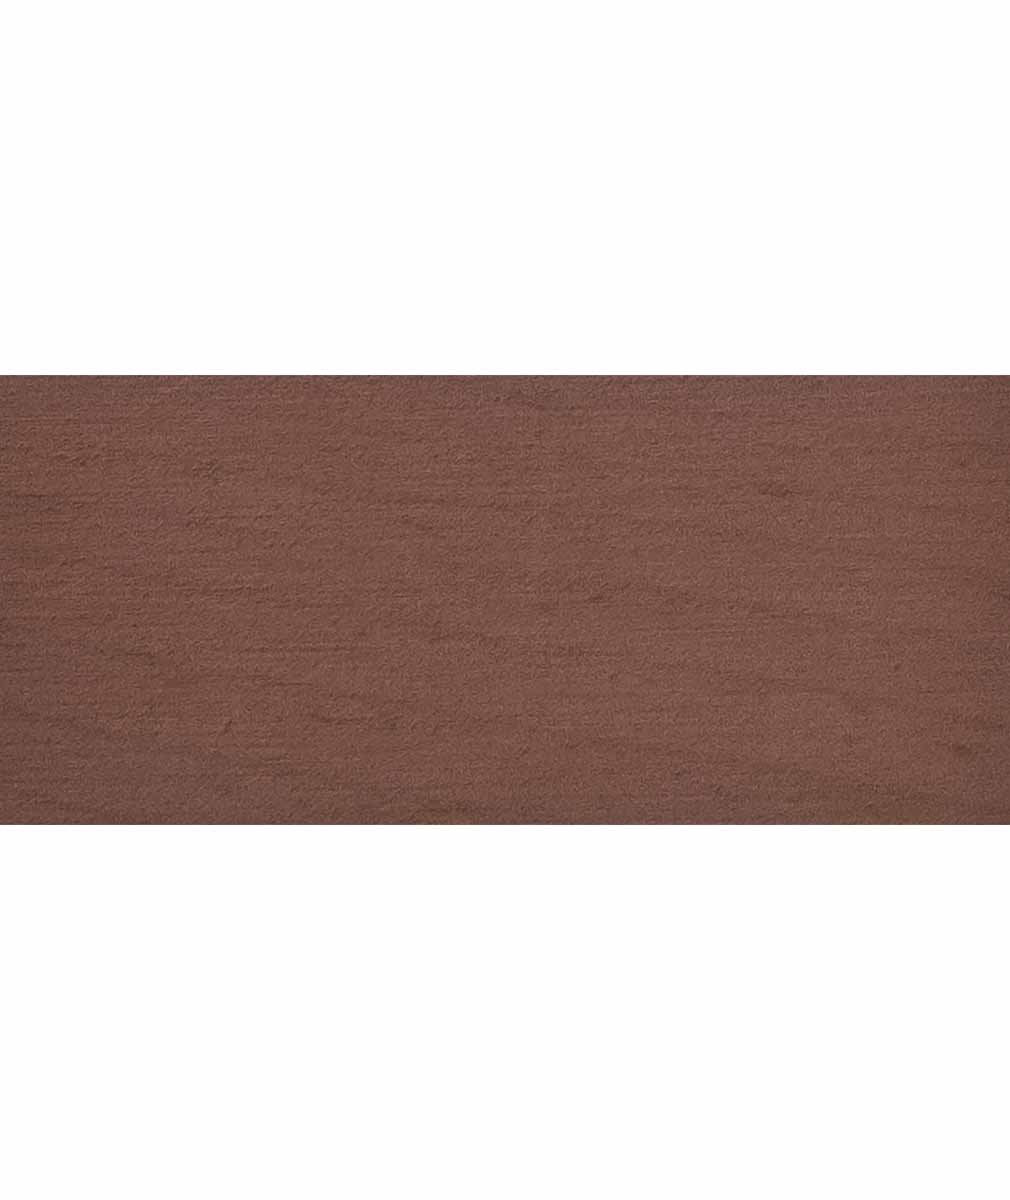 Shop Benjamin Moore&#39;s Pinch of Spice Arborcoat Semi-Solid Stain  from JC Licht